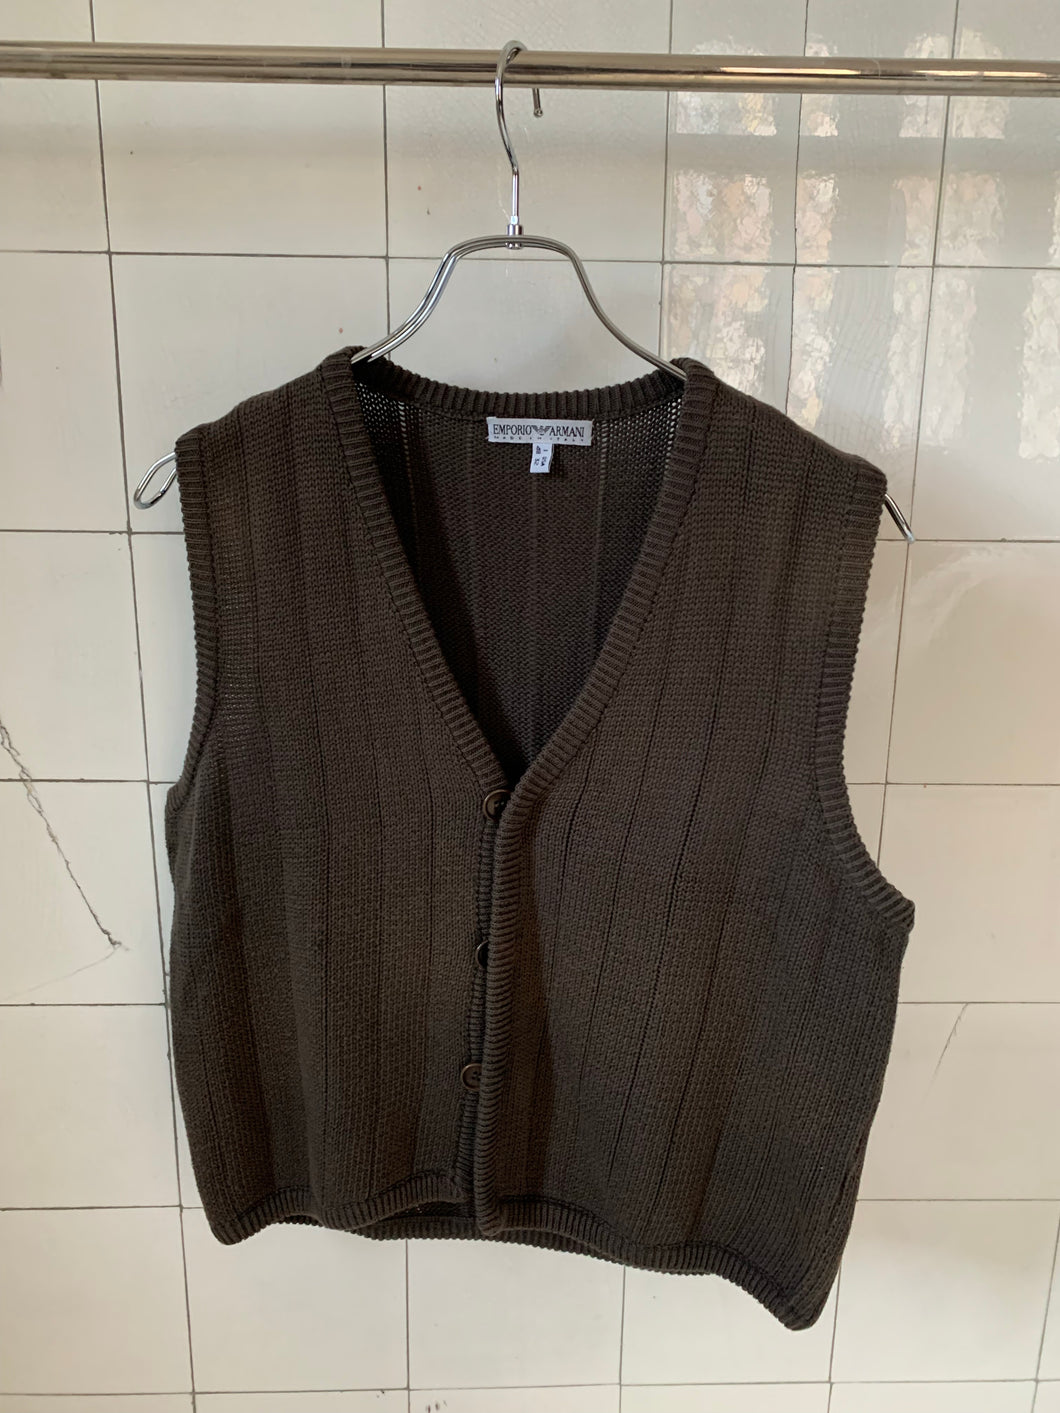 2000s Armani Knitted Brown Vest - Size S